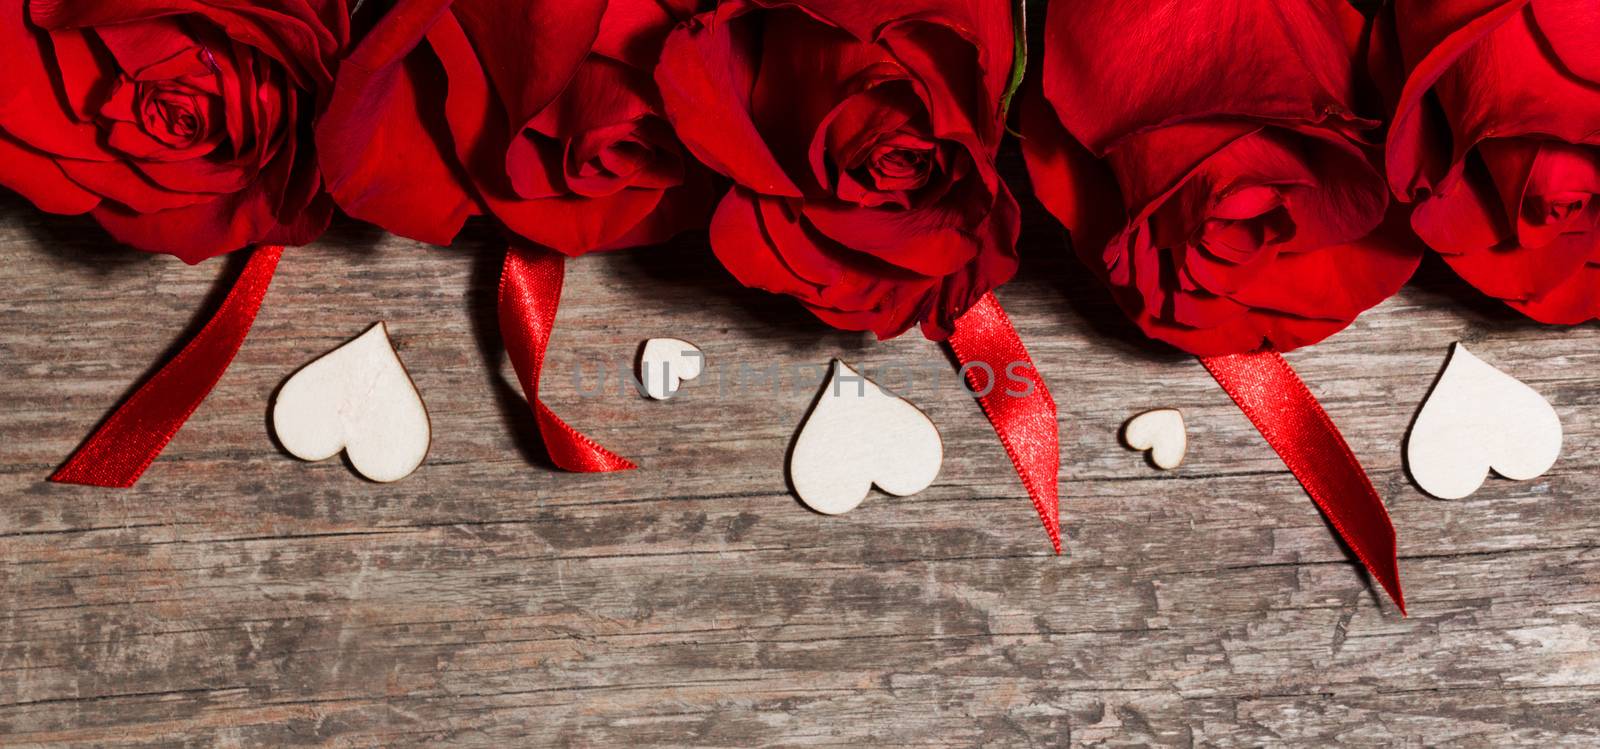 Roses ribbons and wooden hearts on wooden background, Valentines day